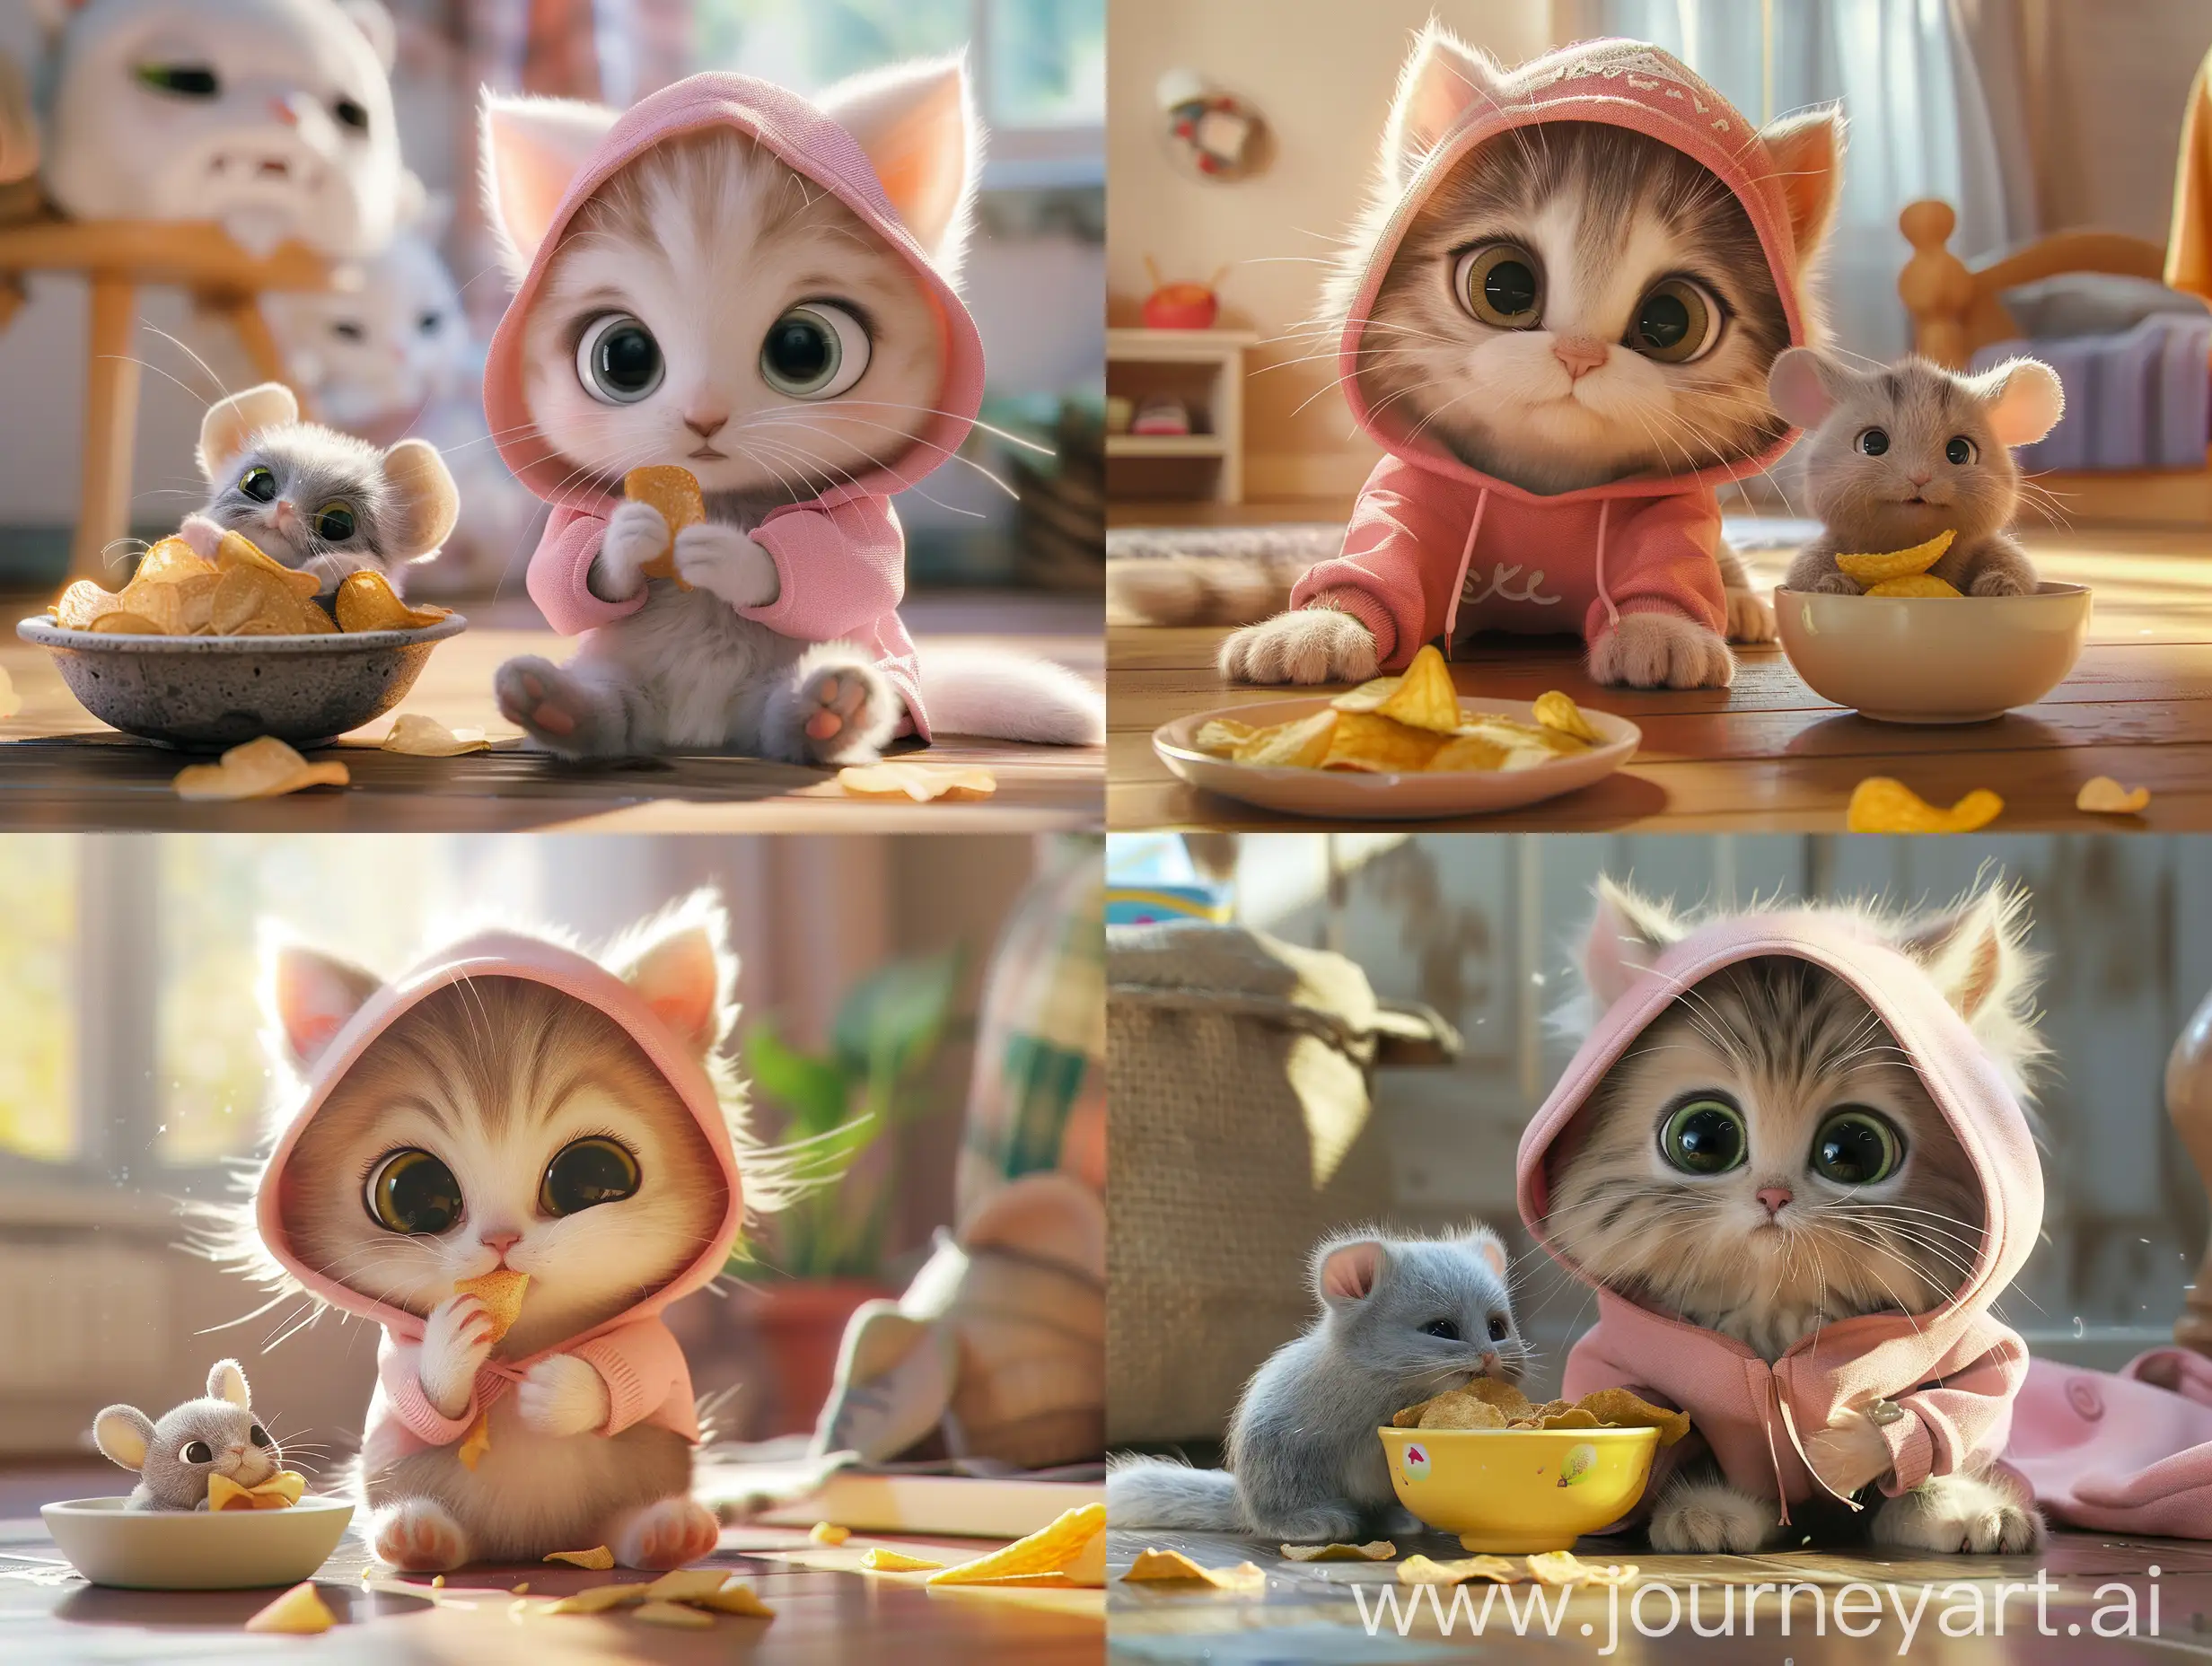 Adorable-Kitten-in-Pink-Hoodie-Hugging-Fluffy-Mouse-Plushie